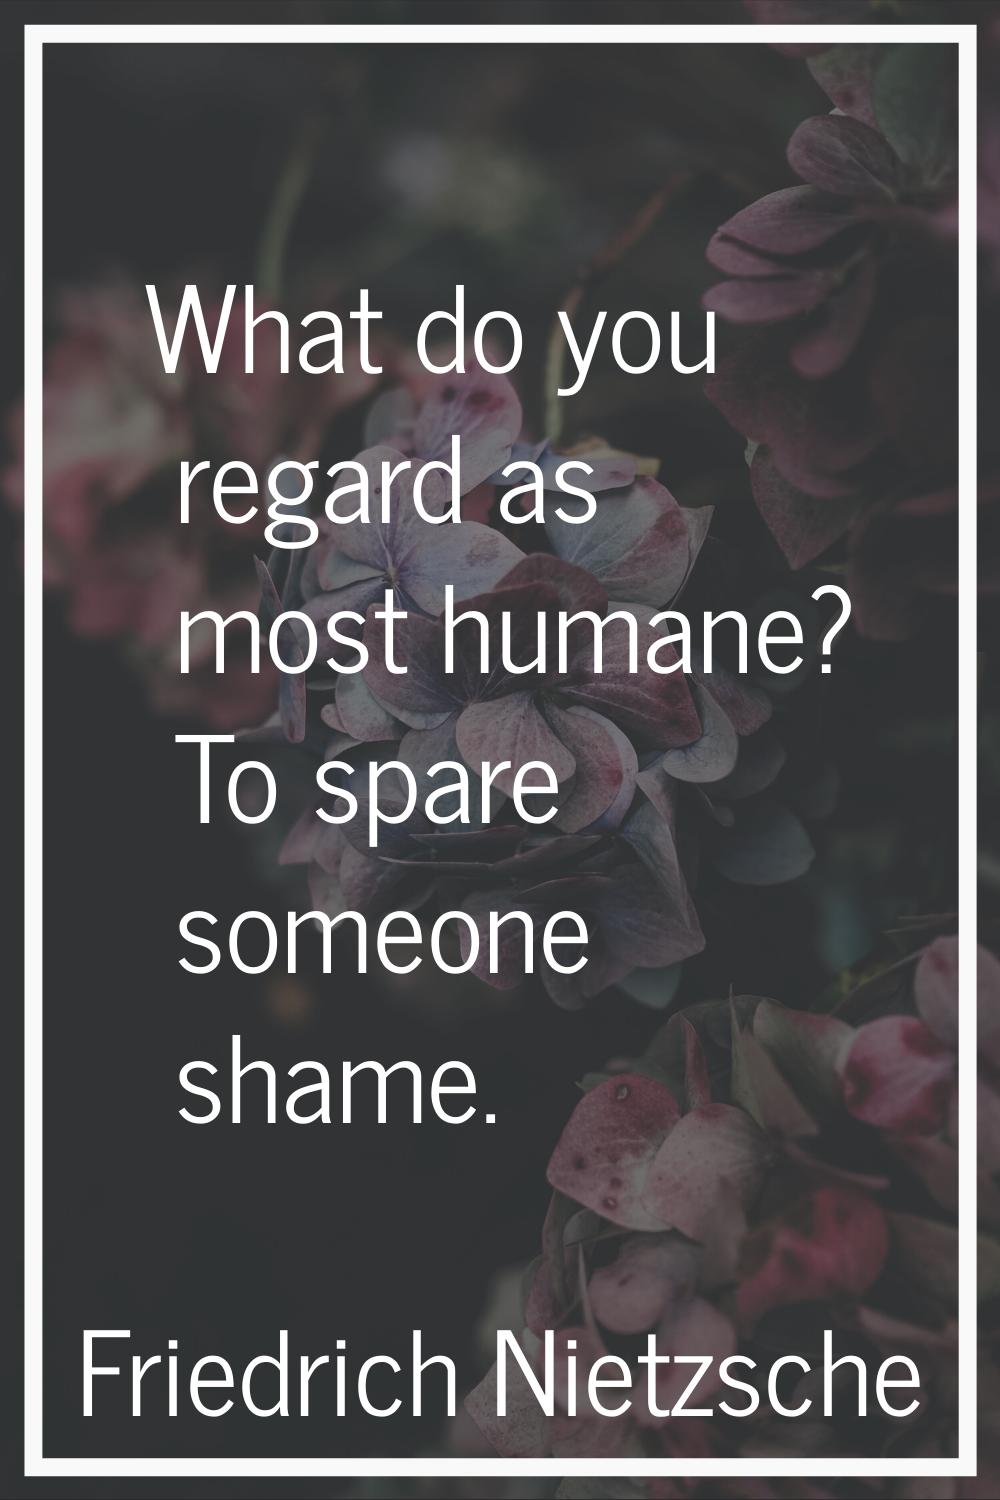 What do you regard as most humane? To spare someone shame.